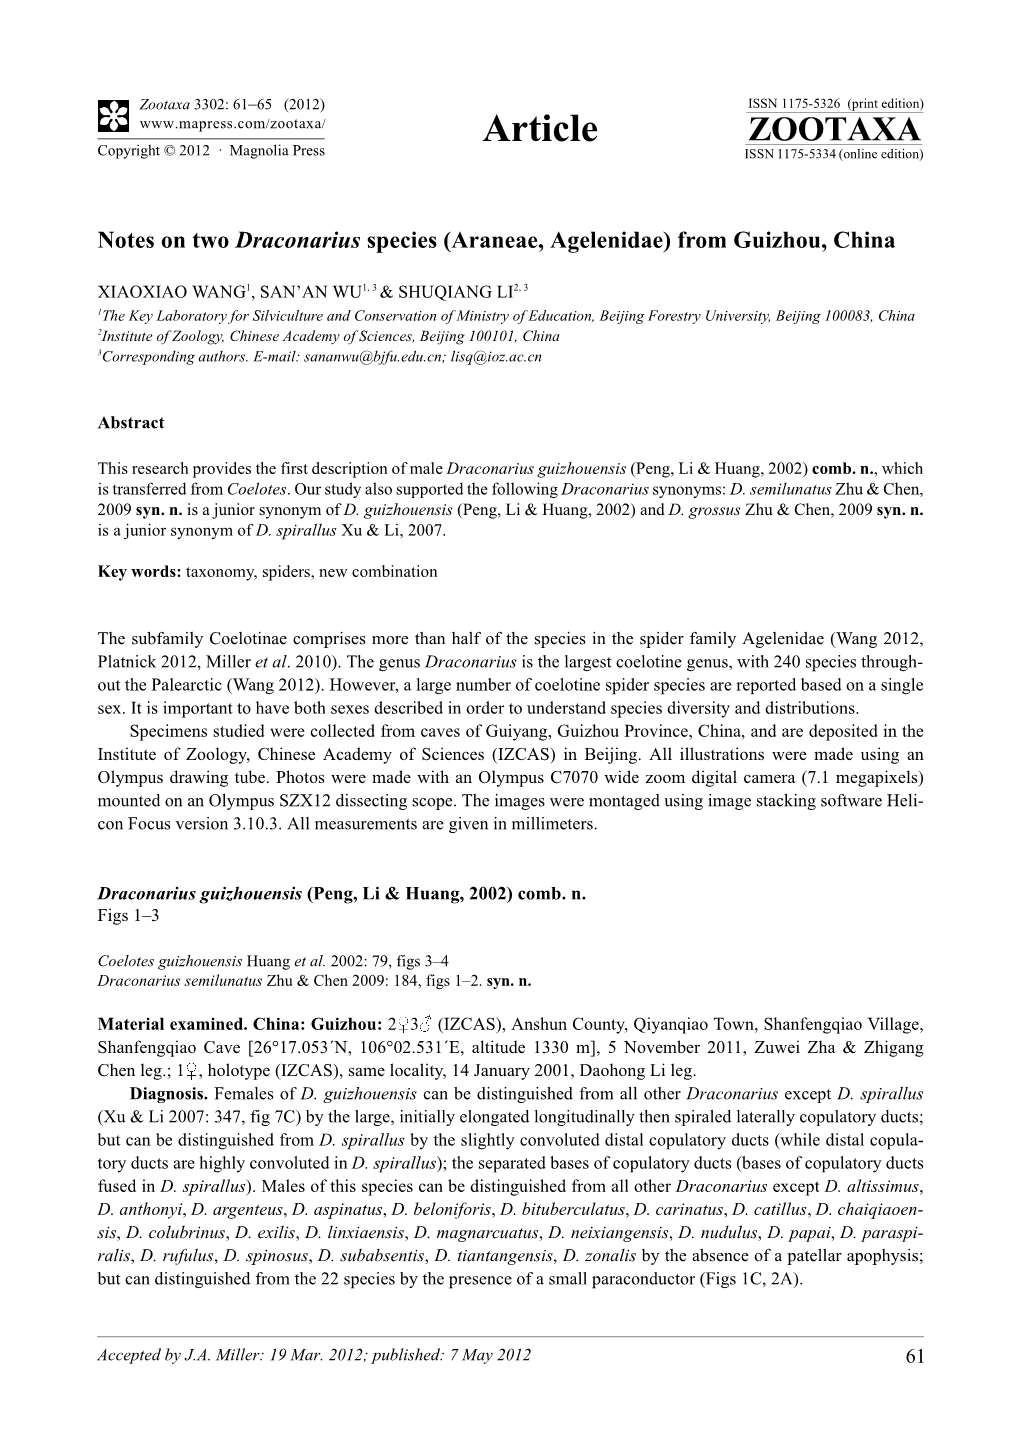 Notes on Two Draconarius Species (Araneae, Agelenidae) from Guizhou, China